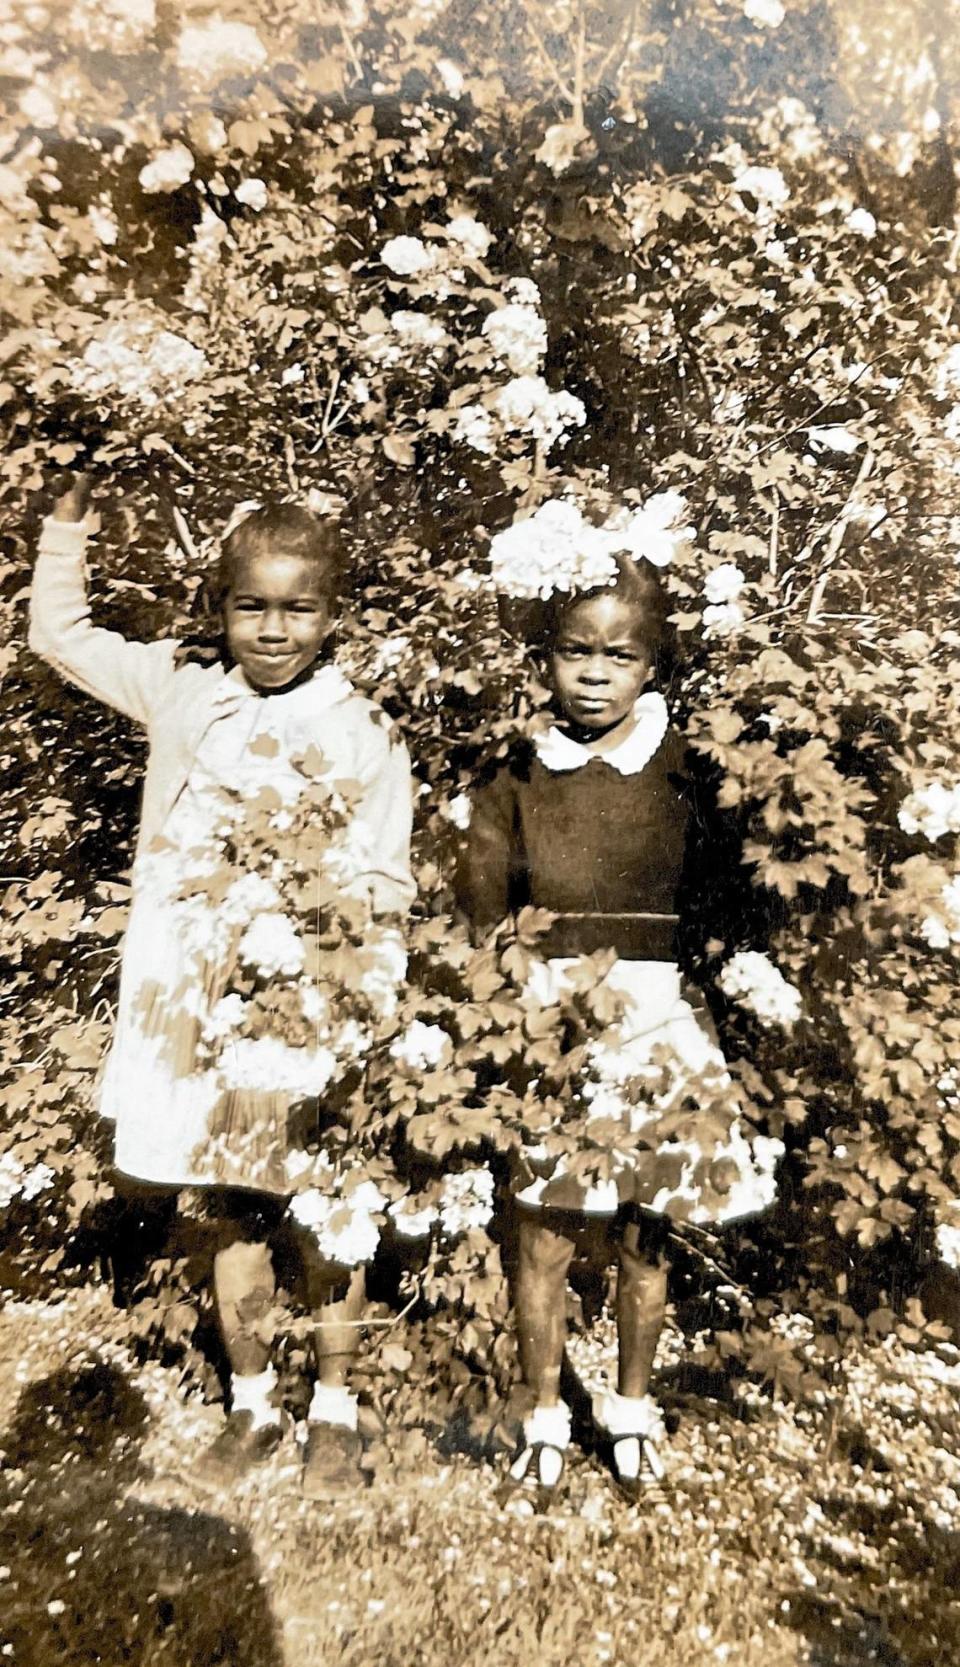 Cousins Georgia Bradsher and Dolores Clark pose together near their homes in Carrboro, N.C. in this family photograph.